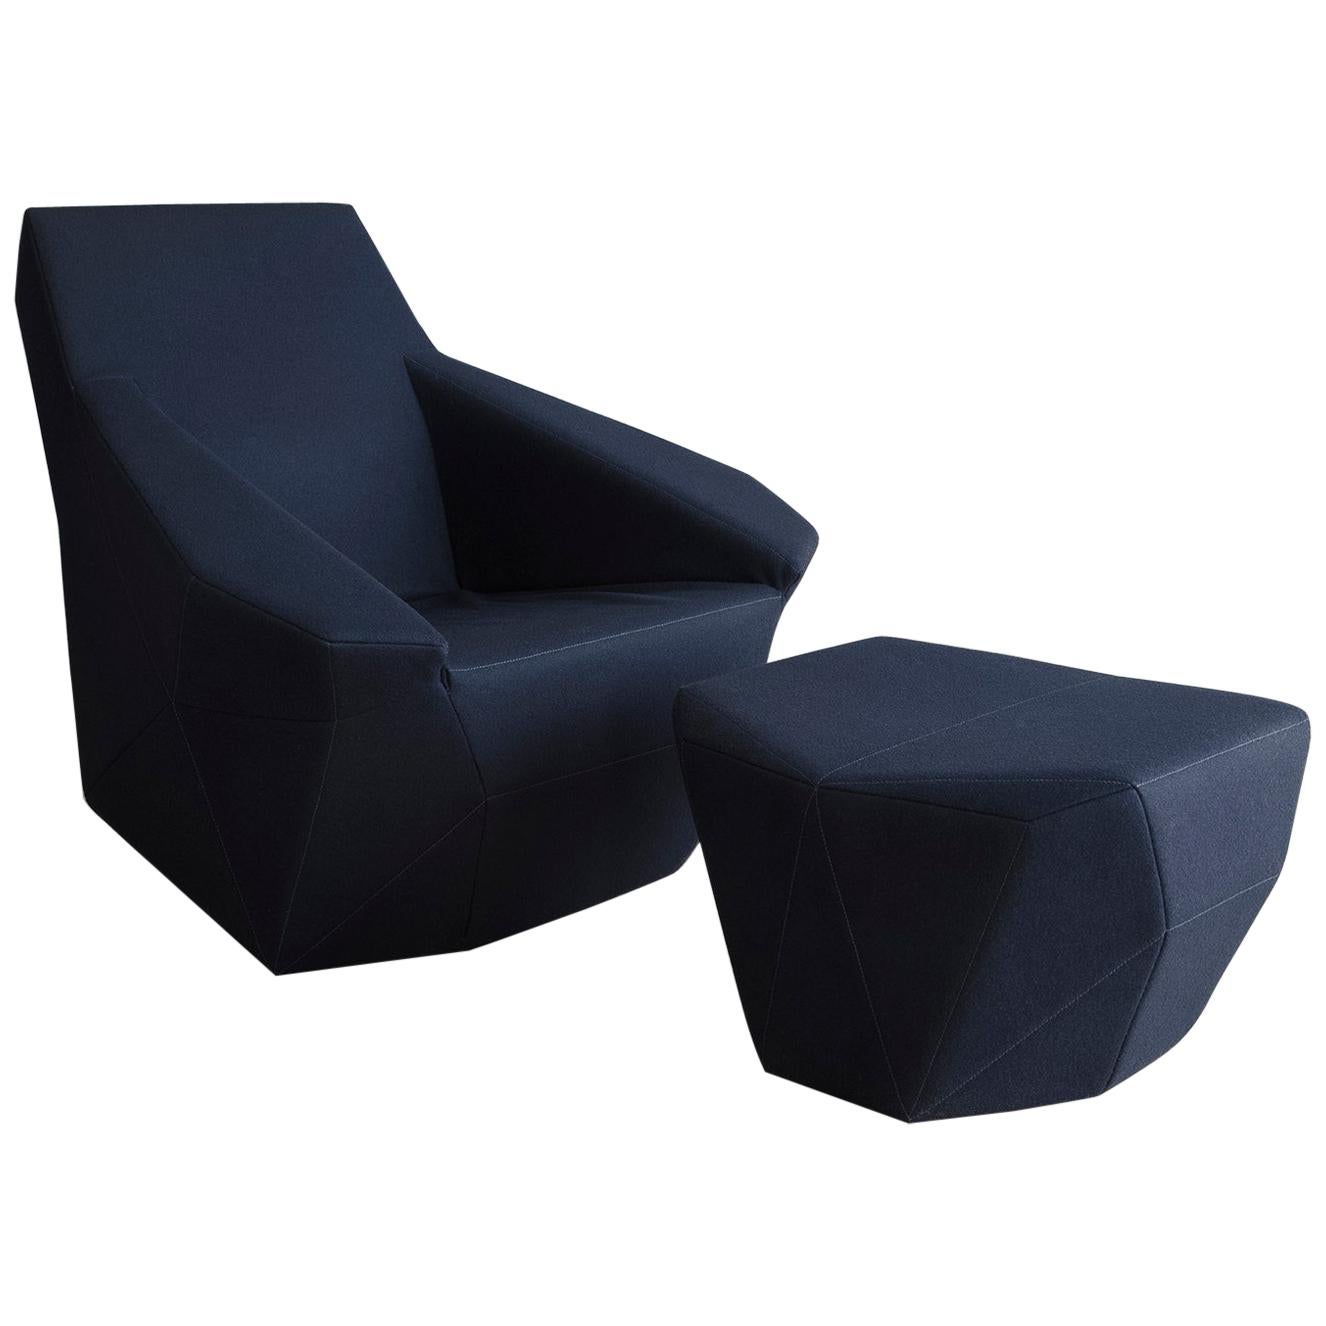 Jyn & Jon Chair and Ottoman by Pablo Reinoso (Domeau & Pérès Edition) For Sale